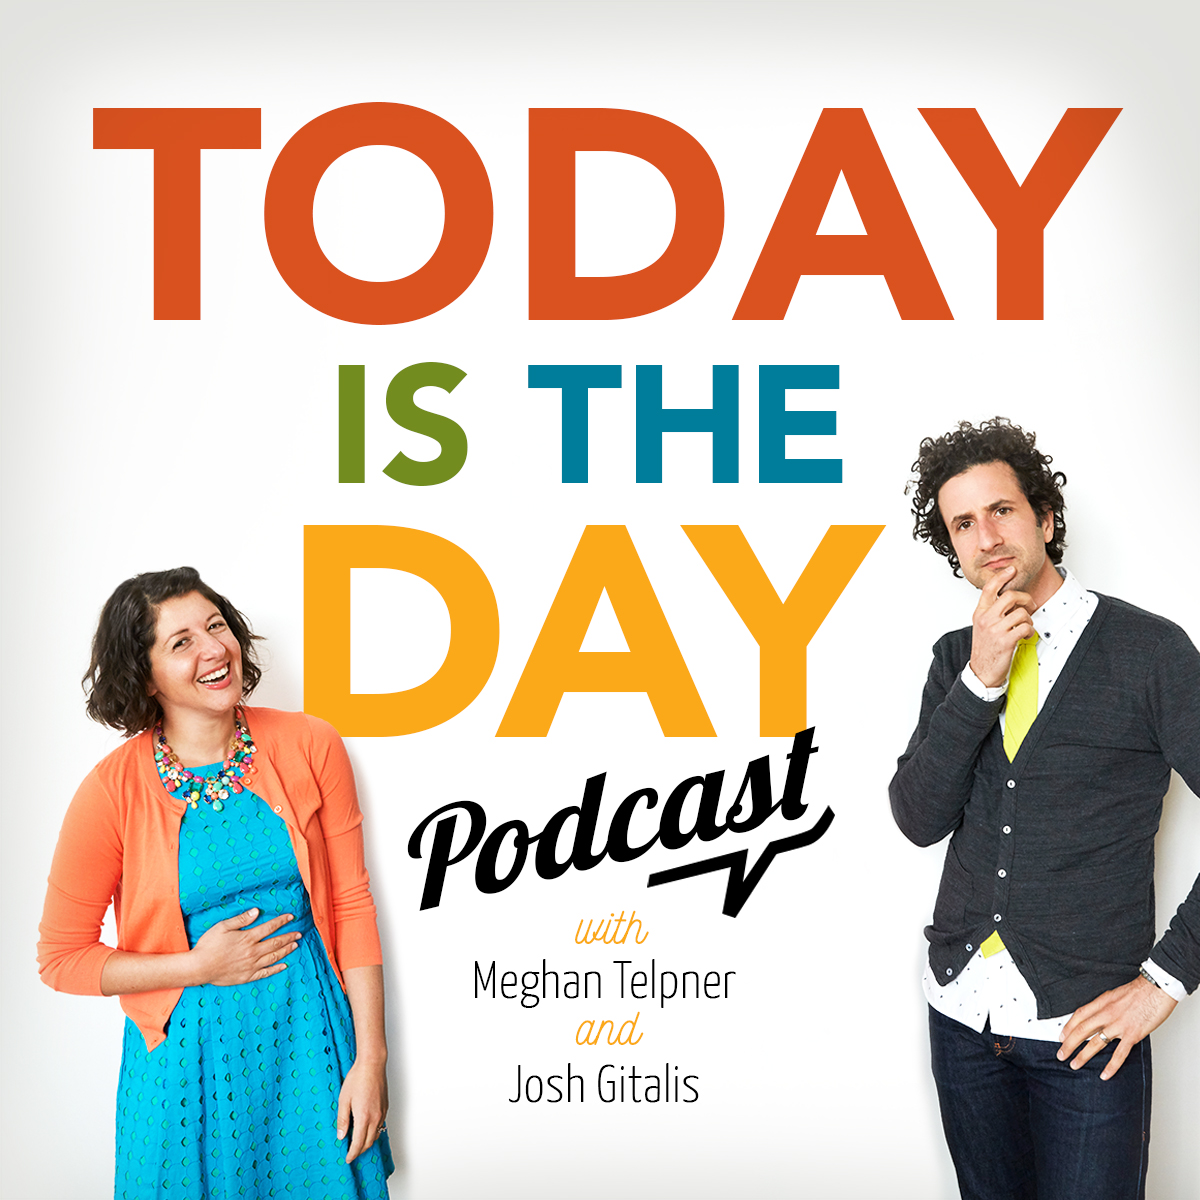 Today Is The Day Podcast by Meghan and Josh